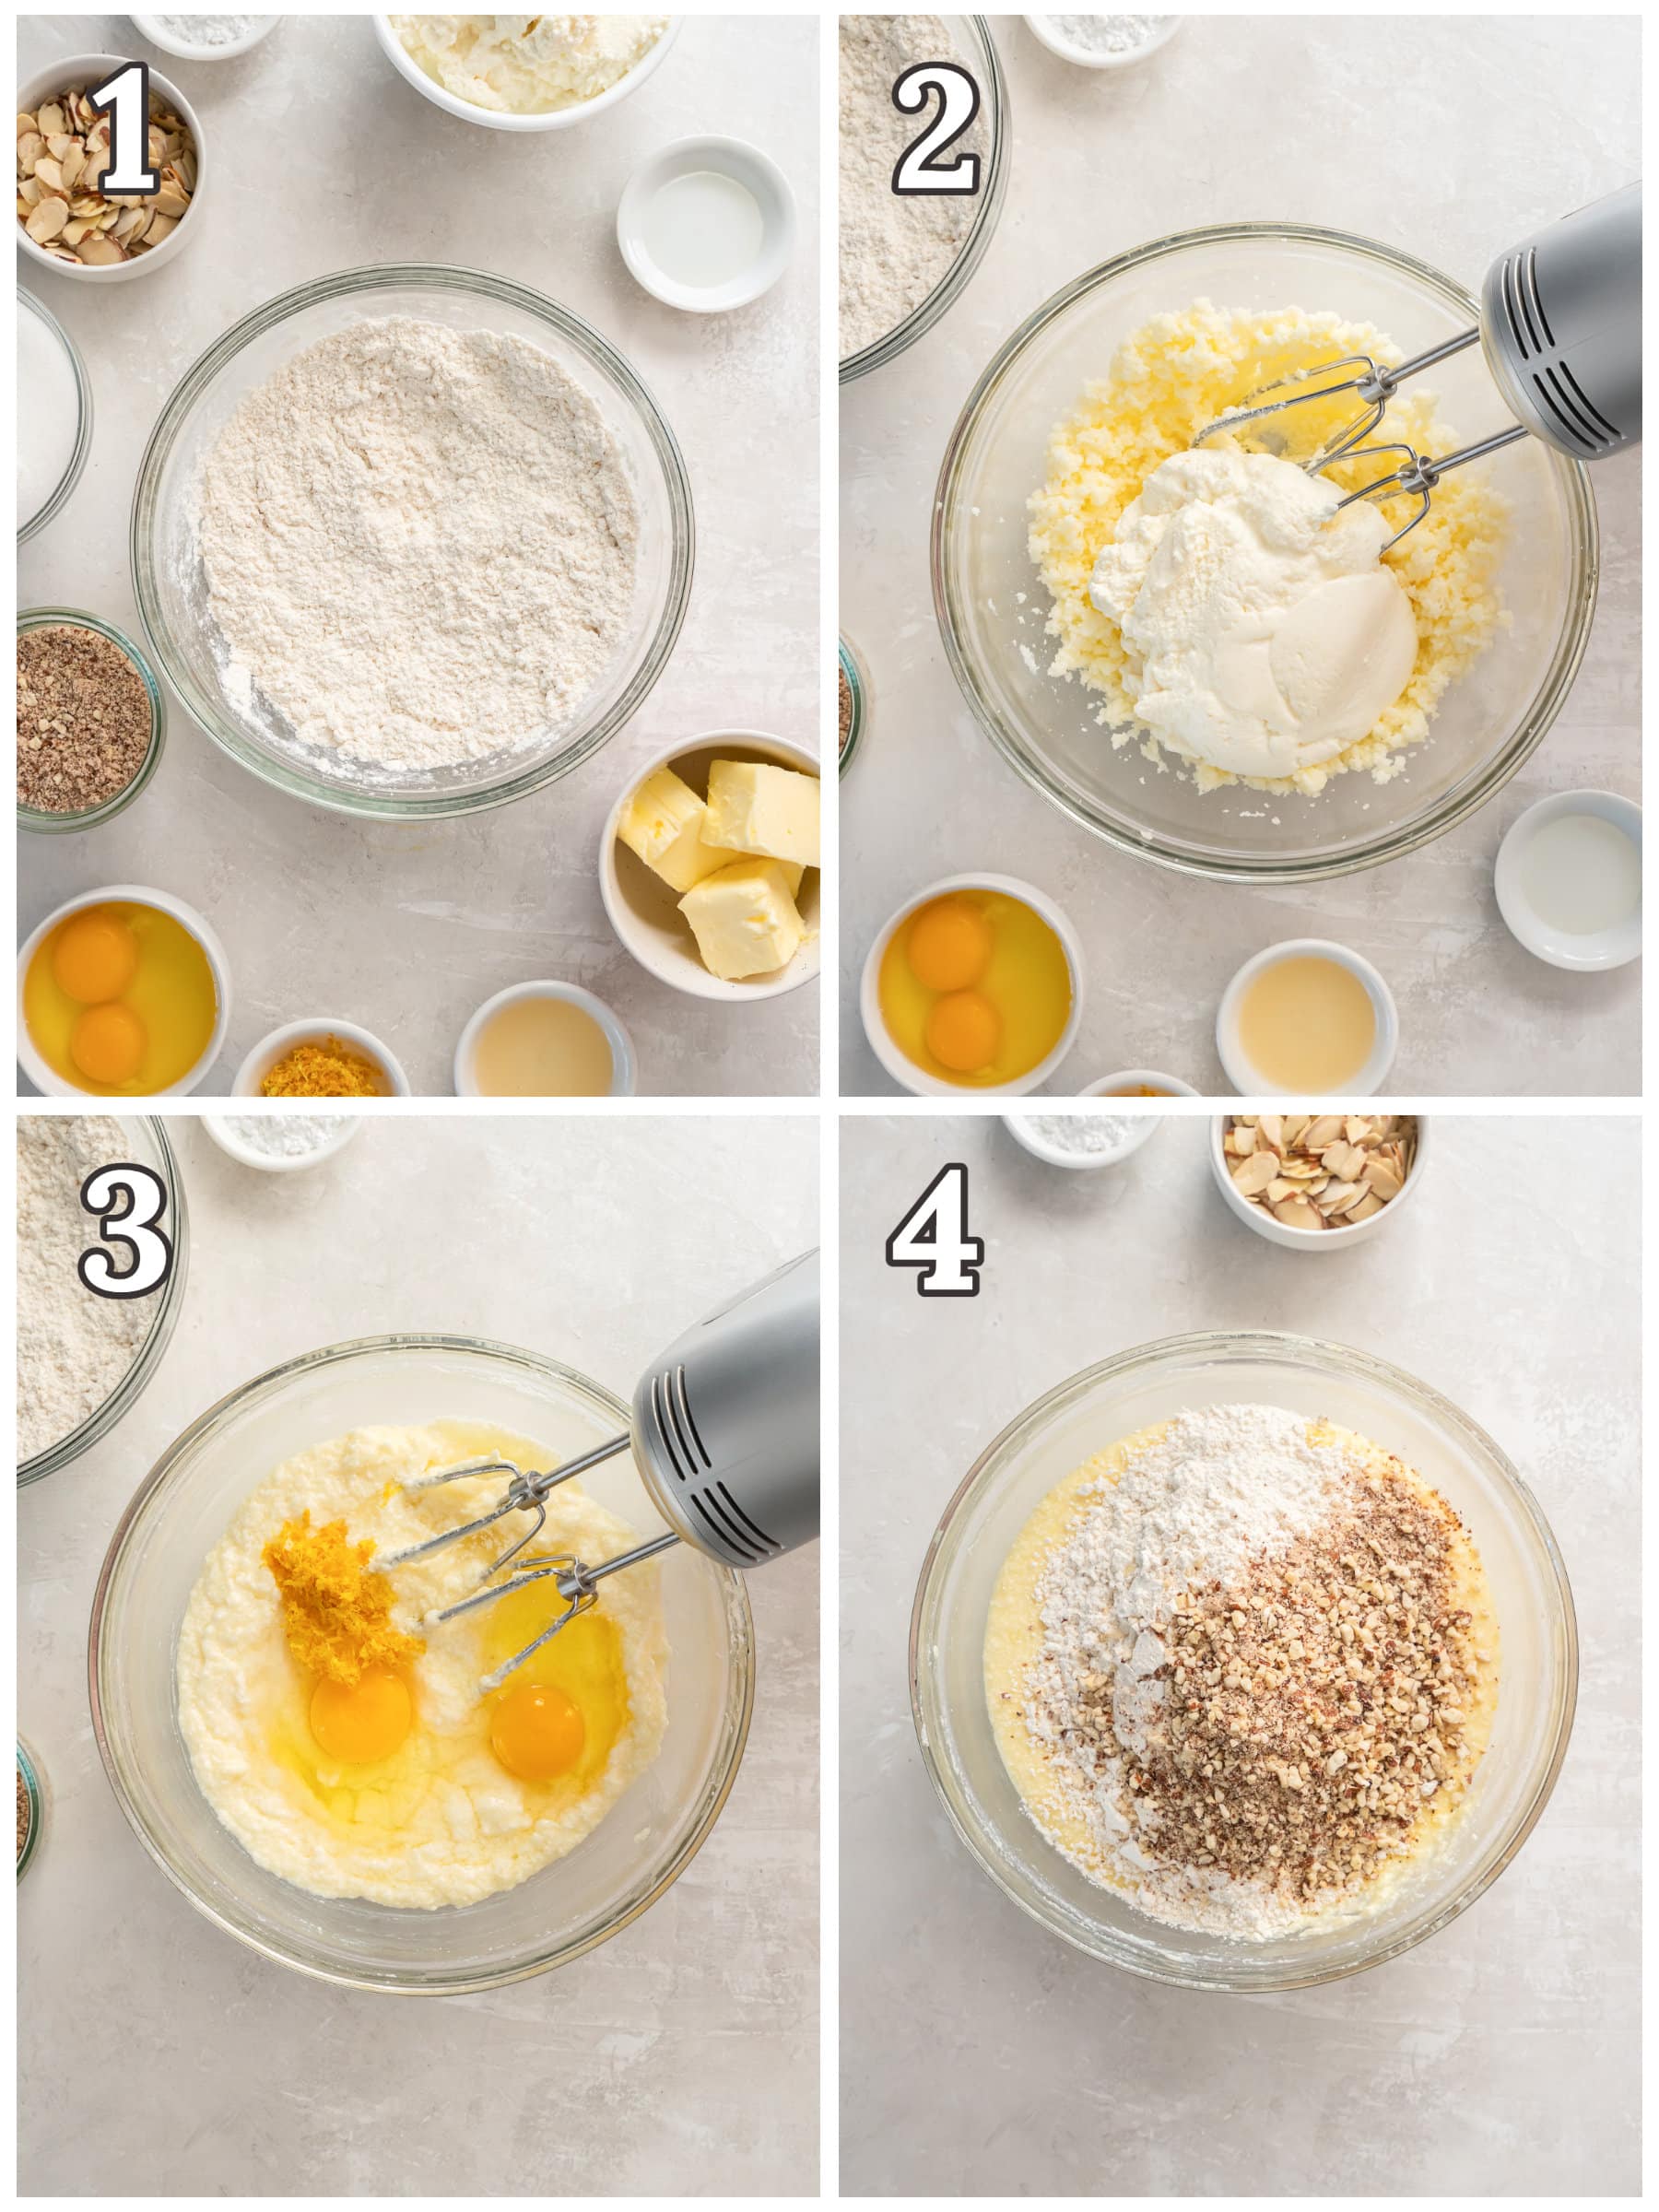 photo collage demonstrating how to make lemon ricotta cake in a mixing bowl.